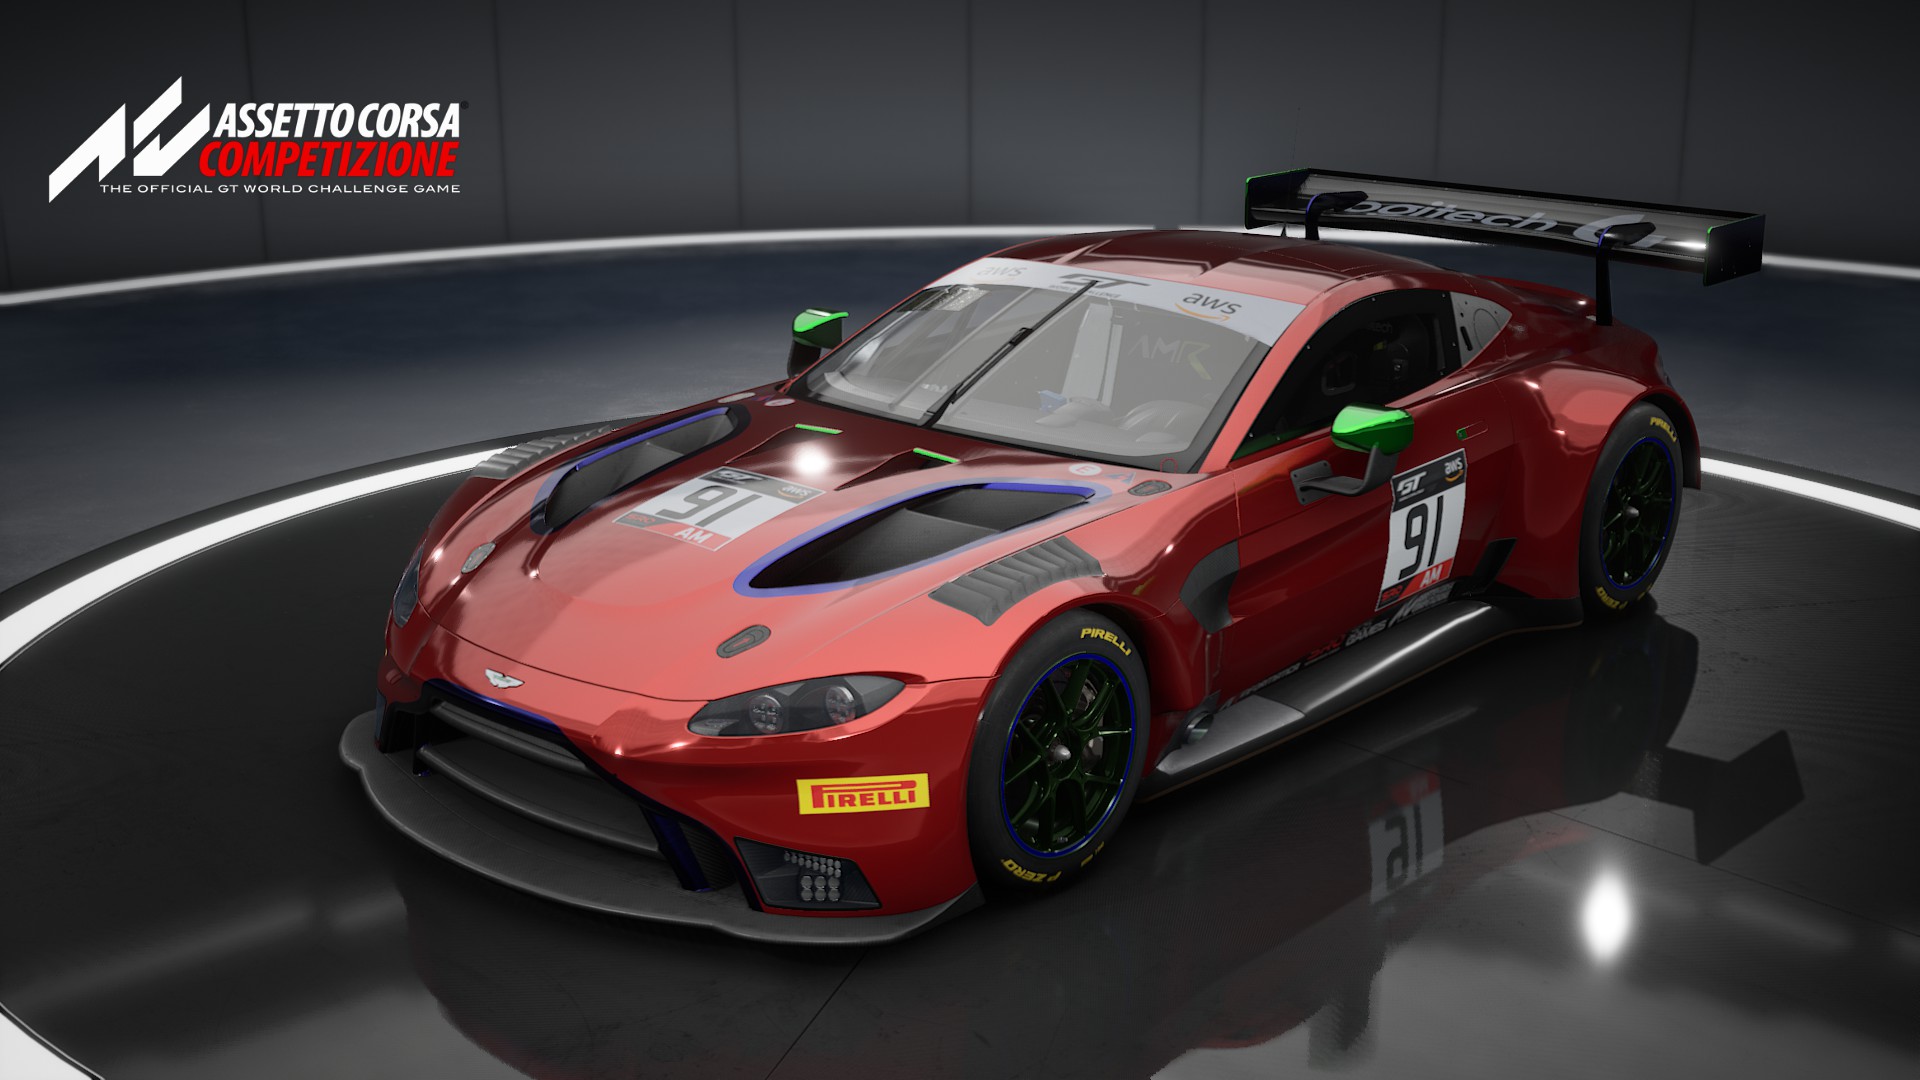 The 2019 Aston Martin V8 Vantage GT3 I used in the 2020.1 simiGTc series. This was made using the built-in livery editor in ACC and I'm not quite happy with how glossy it looks.